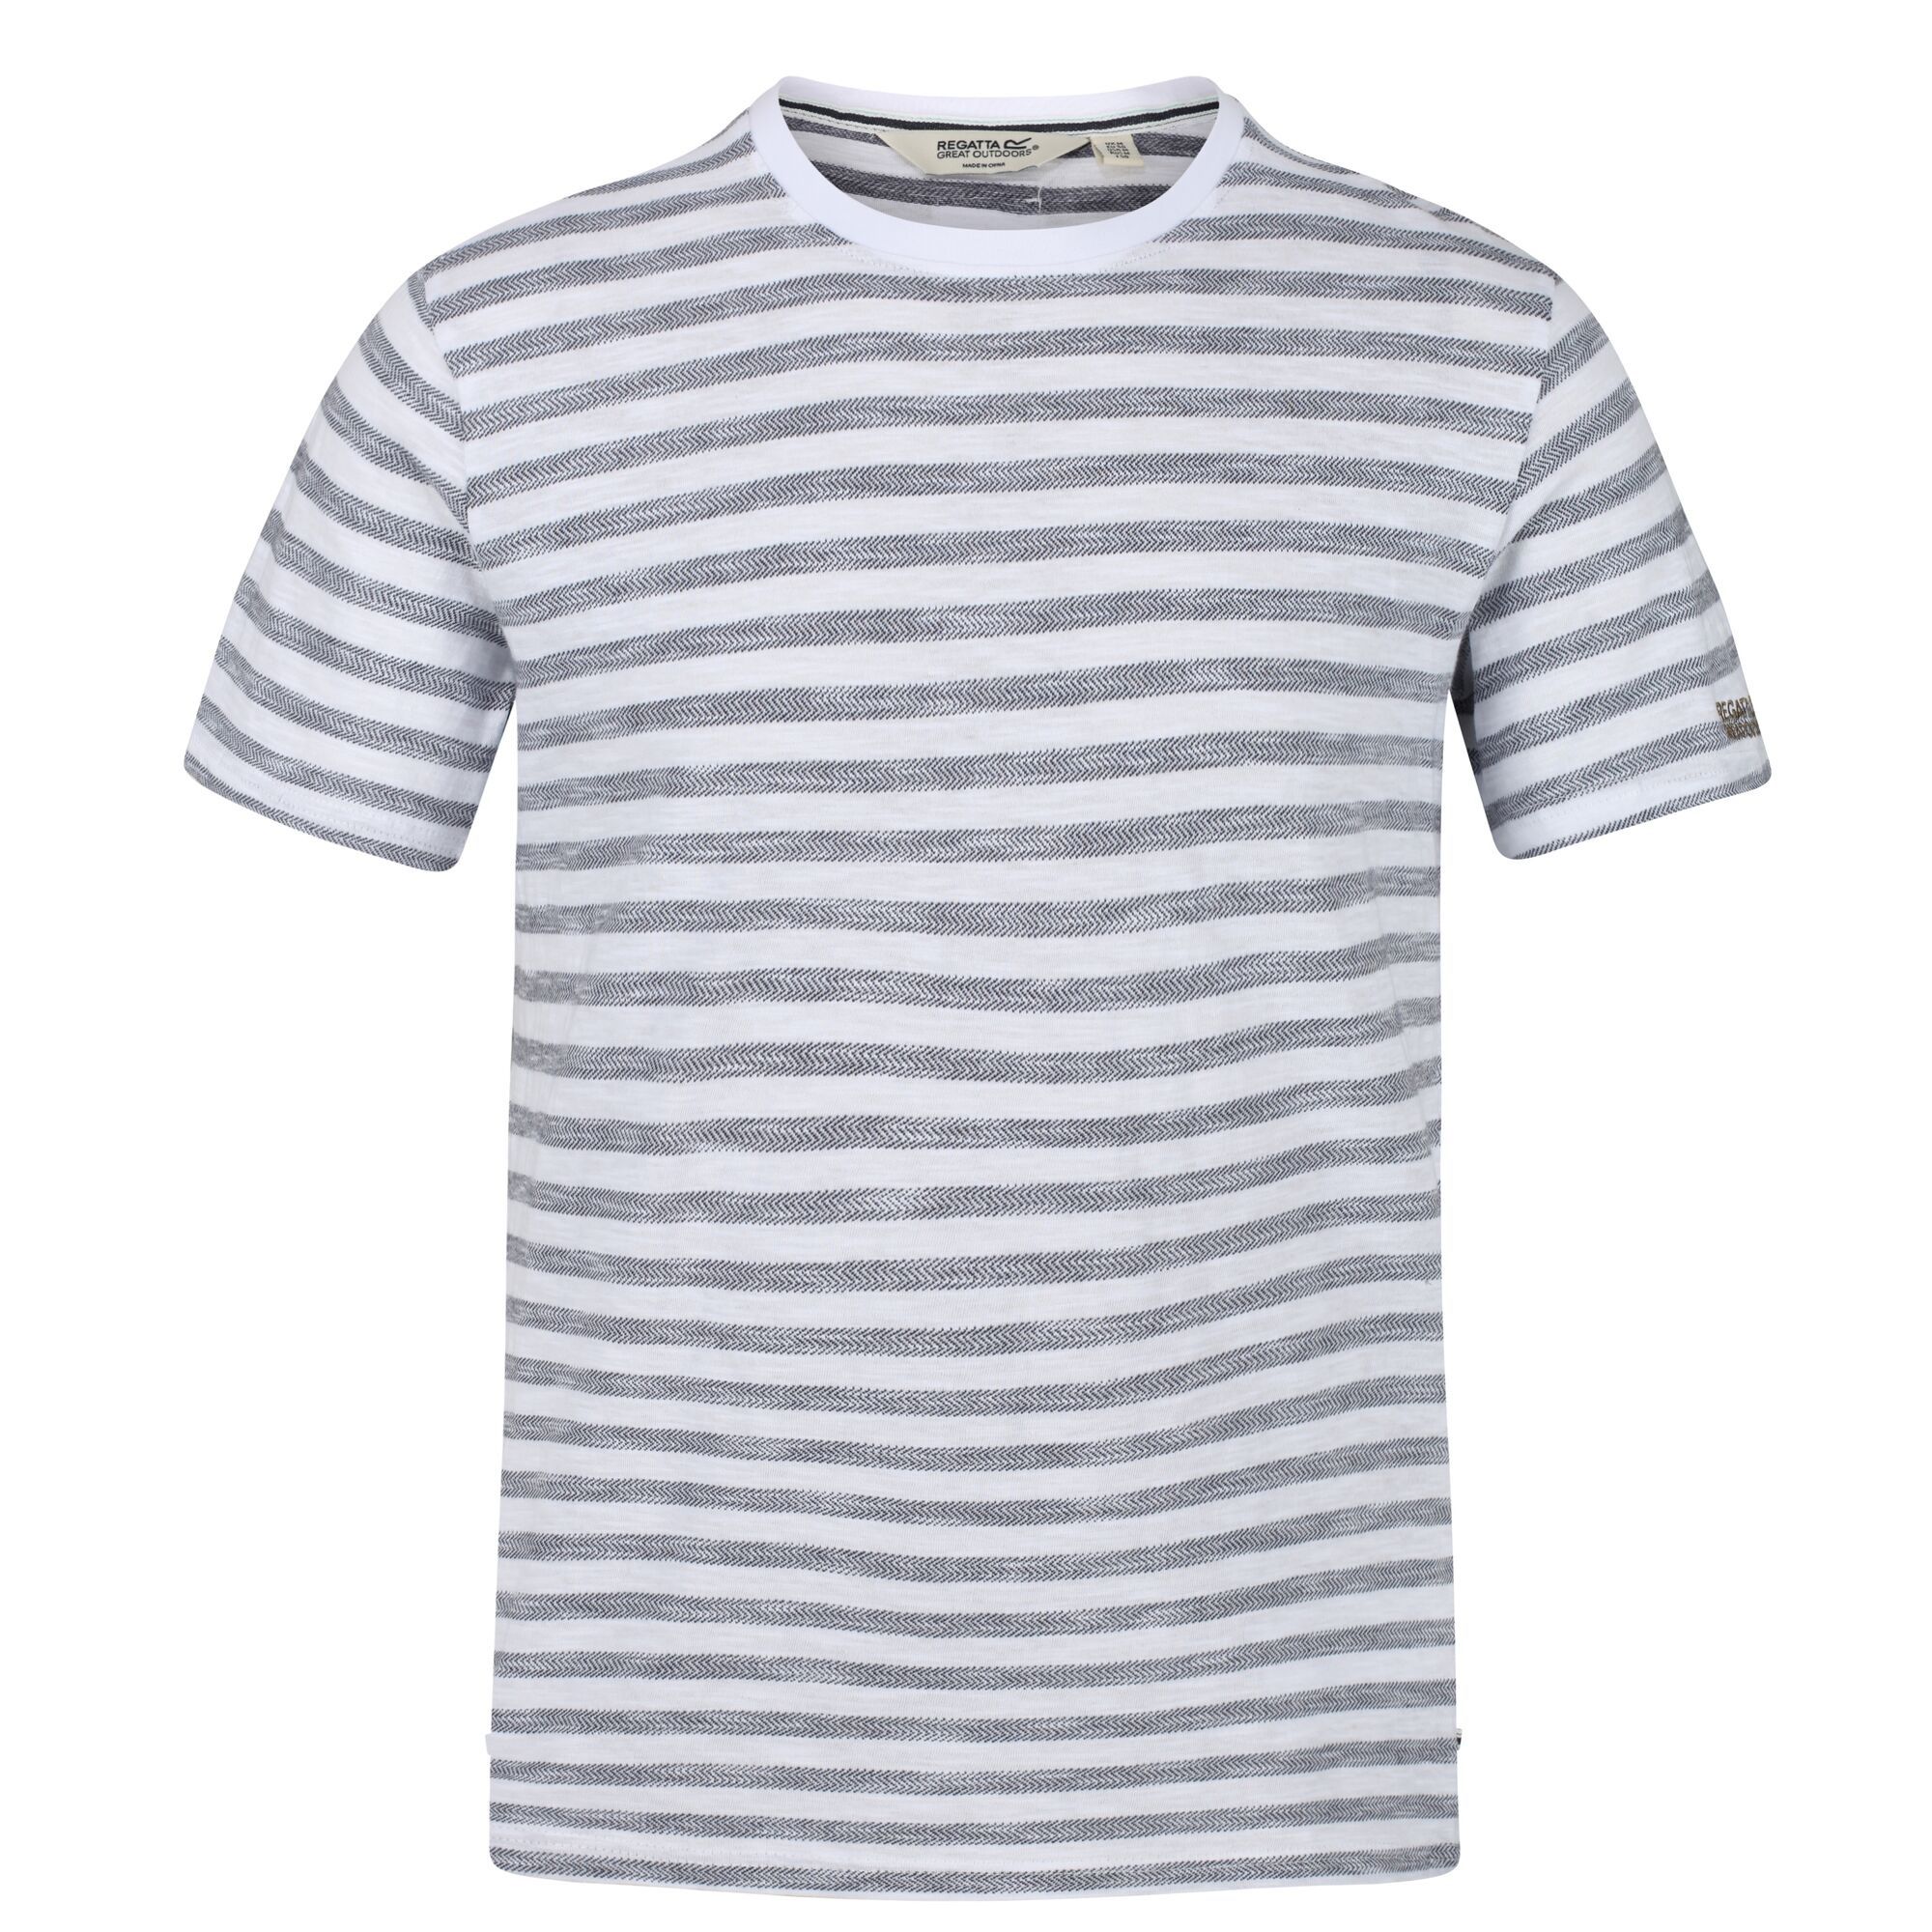 Material: coolweave 100% cotton herringbone striped fabric. Crew neck. Short sleeves.